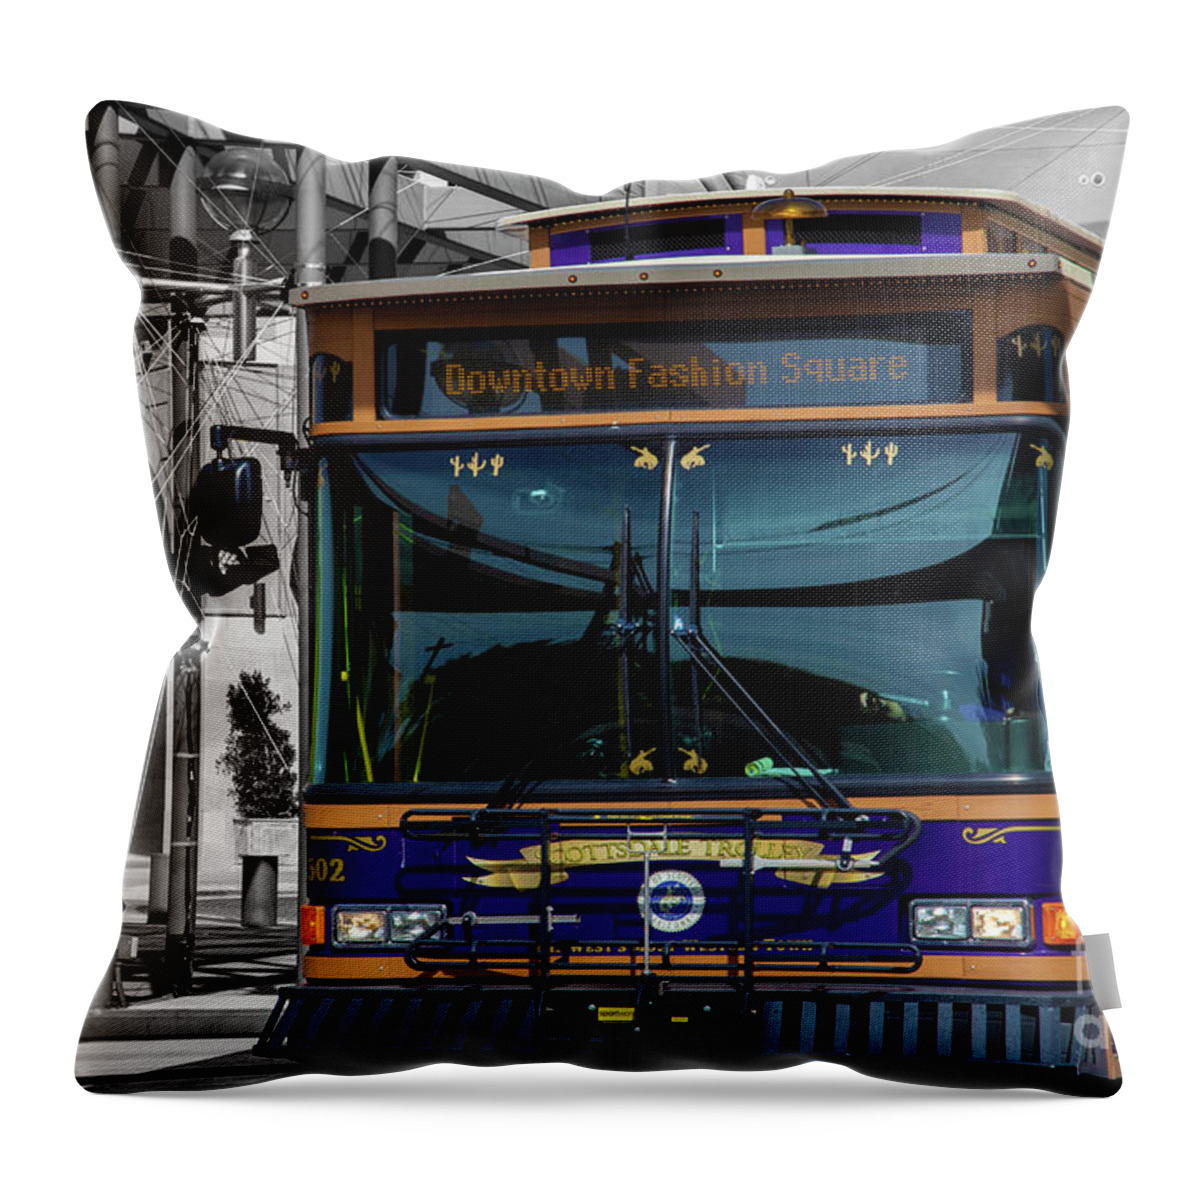 Scottsdale Trolley Throw Pillow featuring the photograph Scottsdale Trolley by Elisabeth Lucas